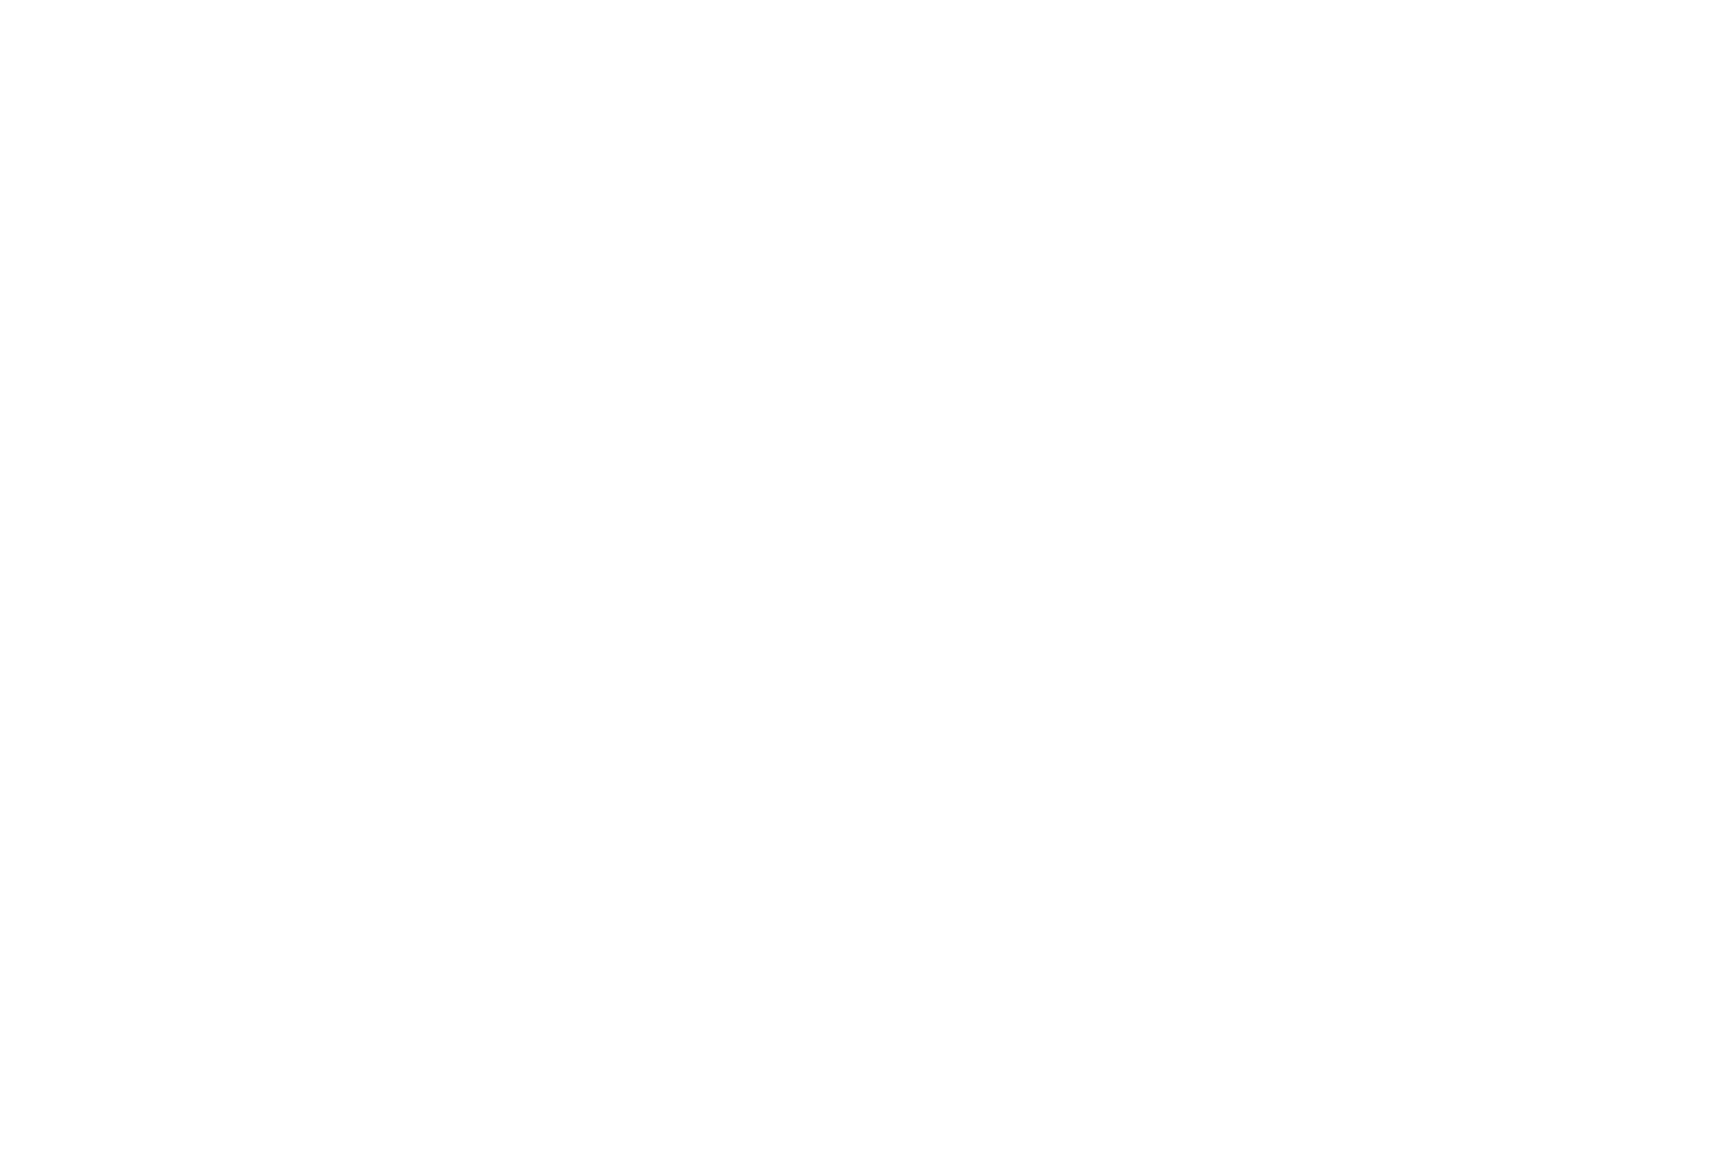 Laurel for Official Selection at Nice International Film Festival awarded to 'L'estoc' in 2018